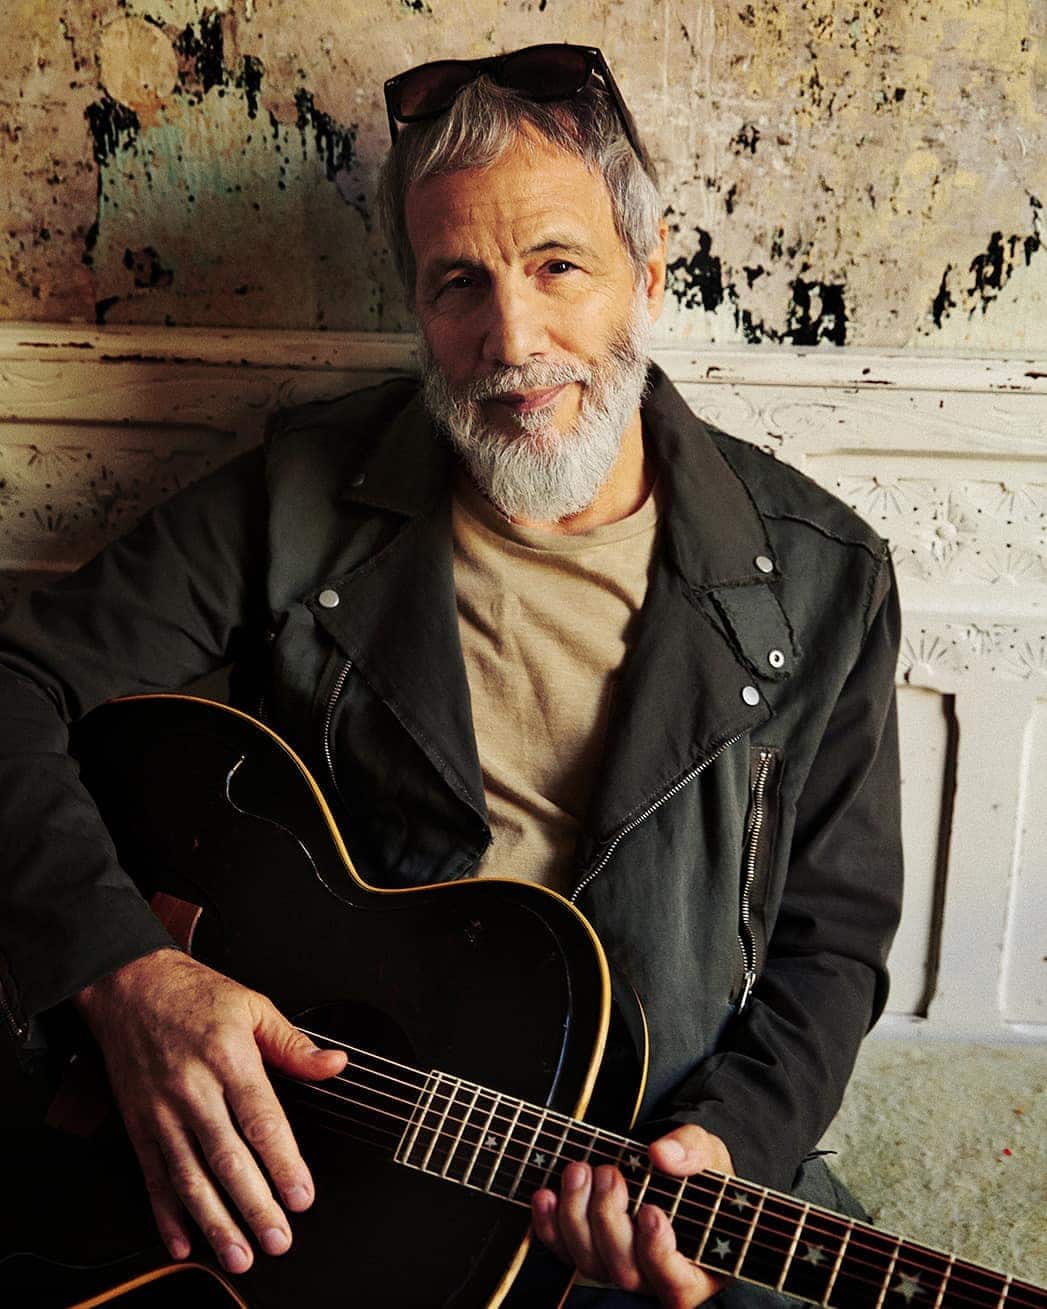 Cat Stevens The iconic singer touched people's lives in many ways